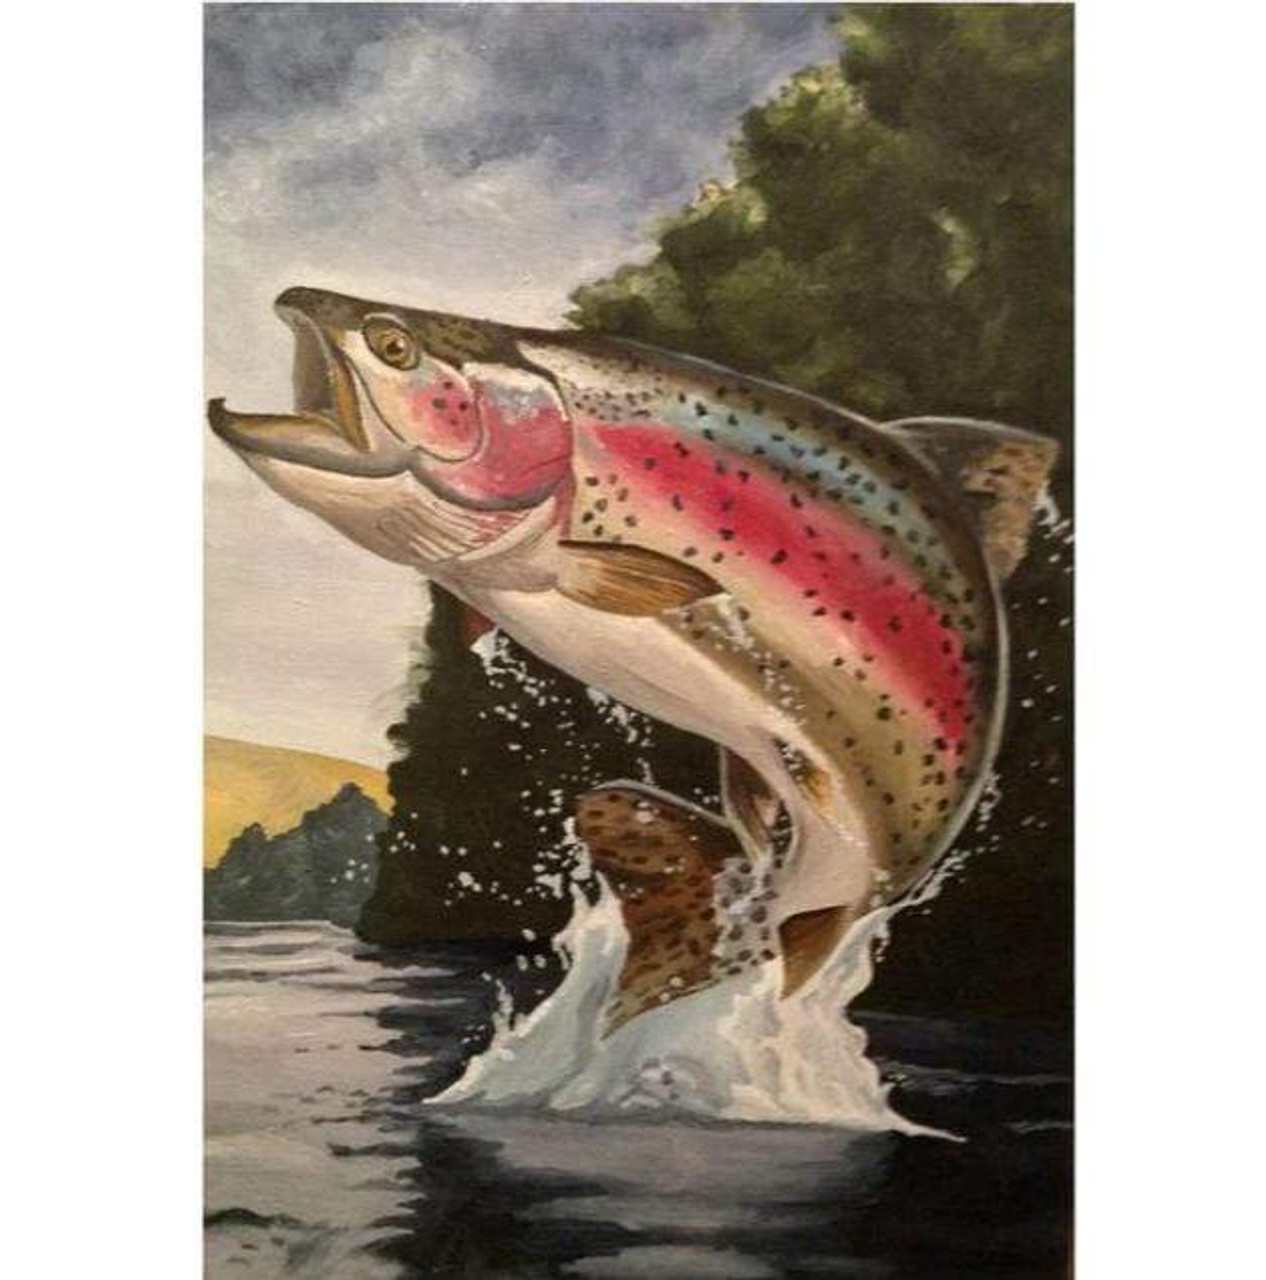 Diamond Painting Kit for Adults Retro Trout Fly Fishing Fishing